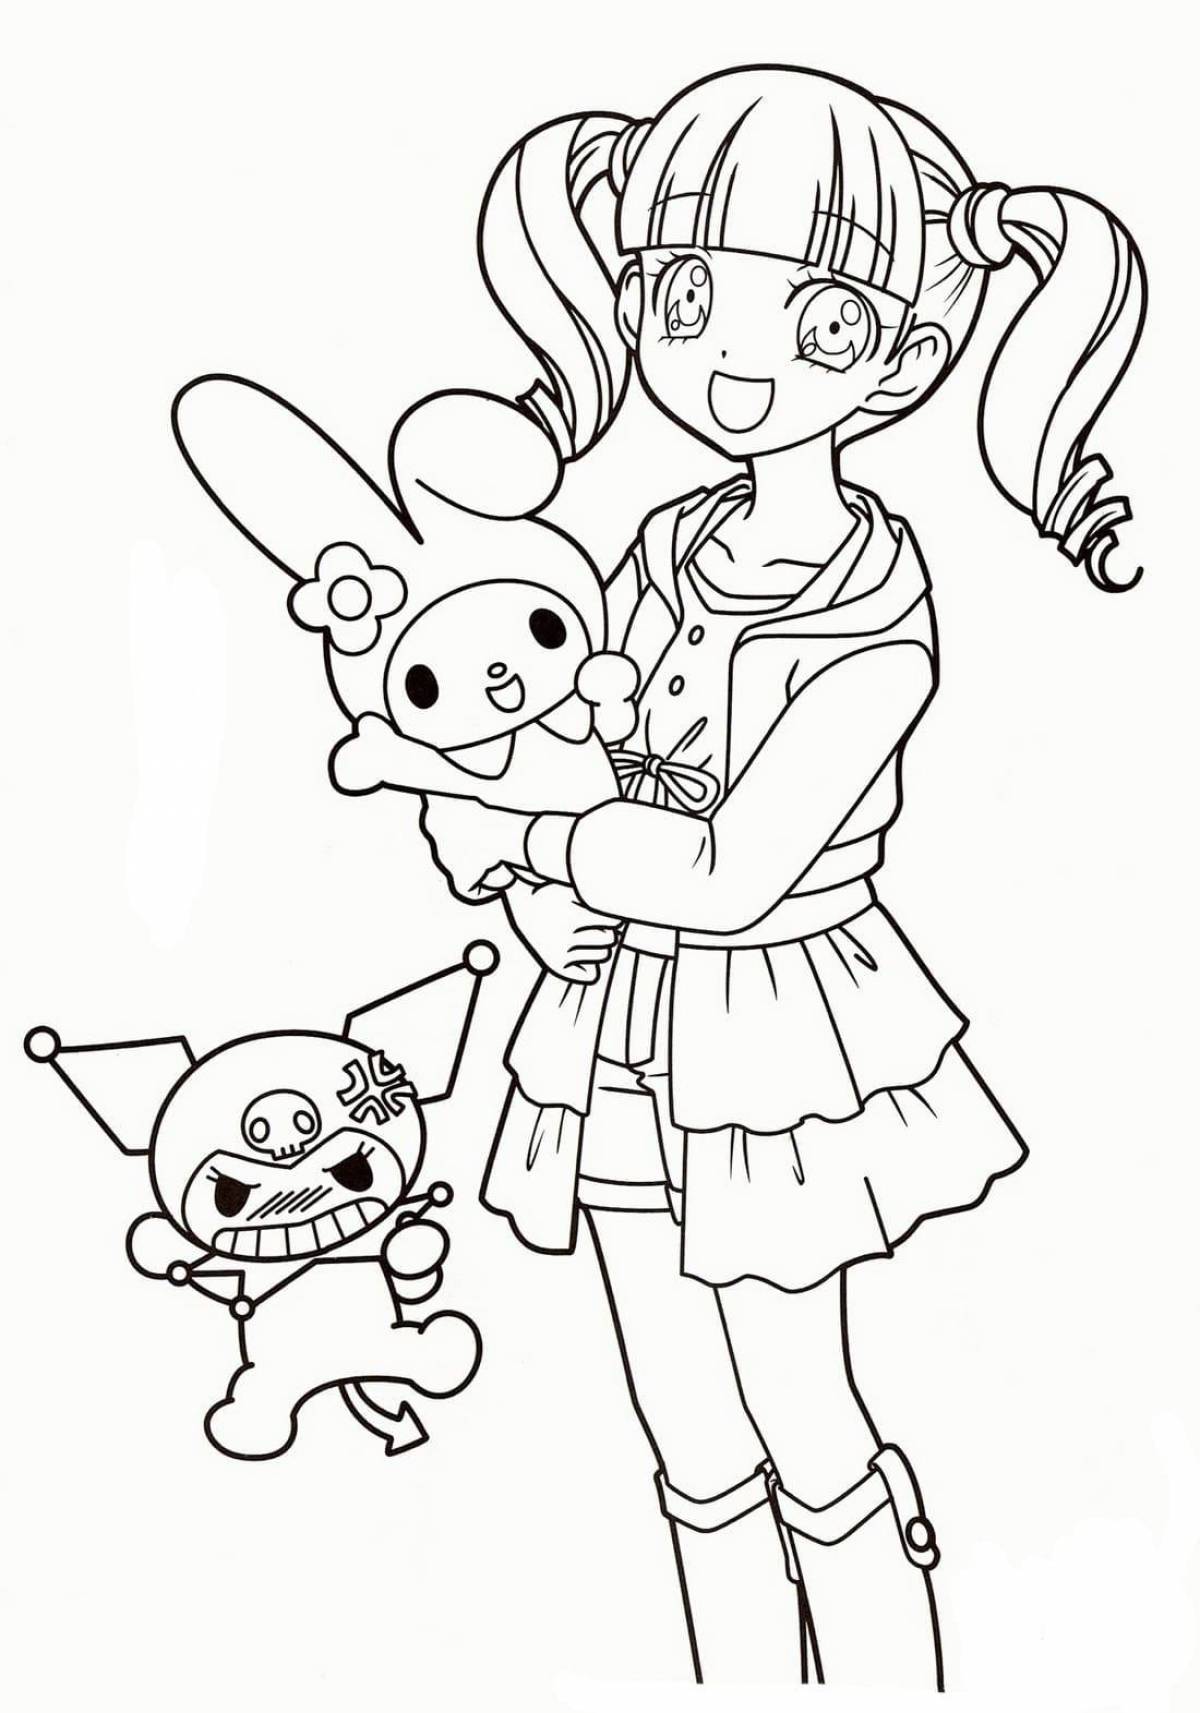 Kuromi and Mai Melody's colorful coloring page